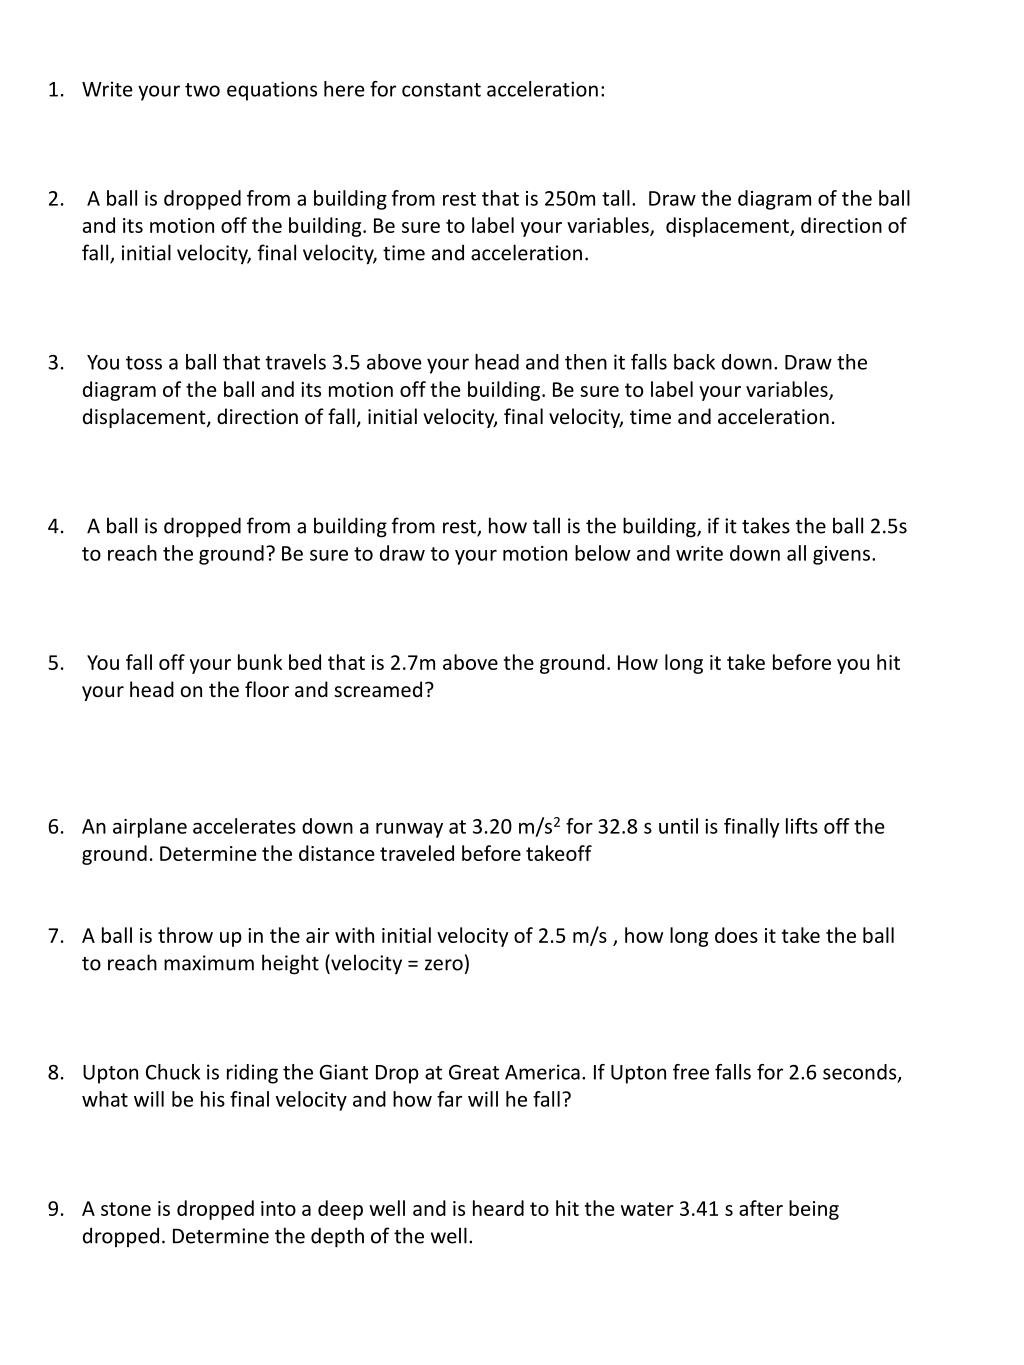 PPT - Free Fall and the Acceleration of Gravity Worksheet Intended For Free Fall Problems Worksheet